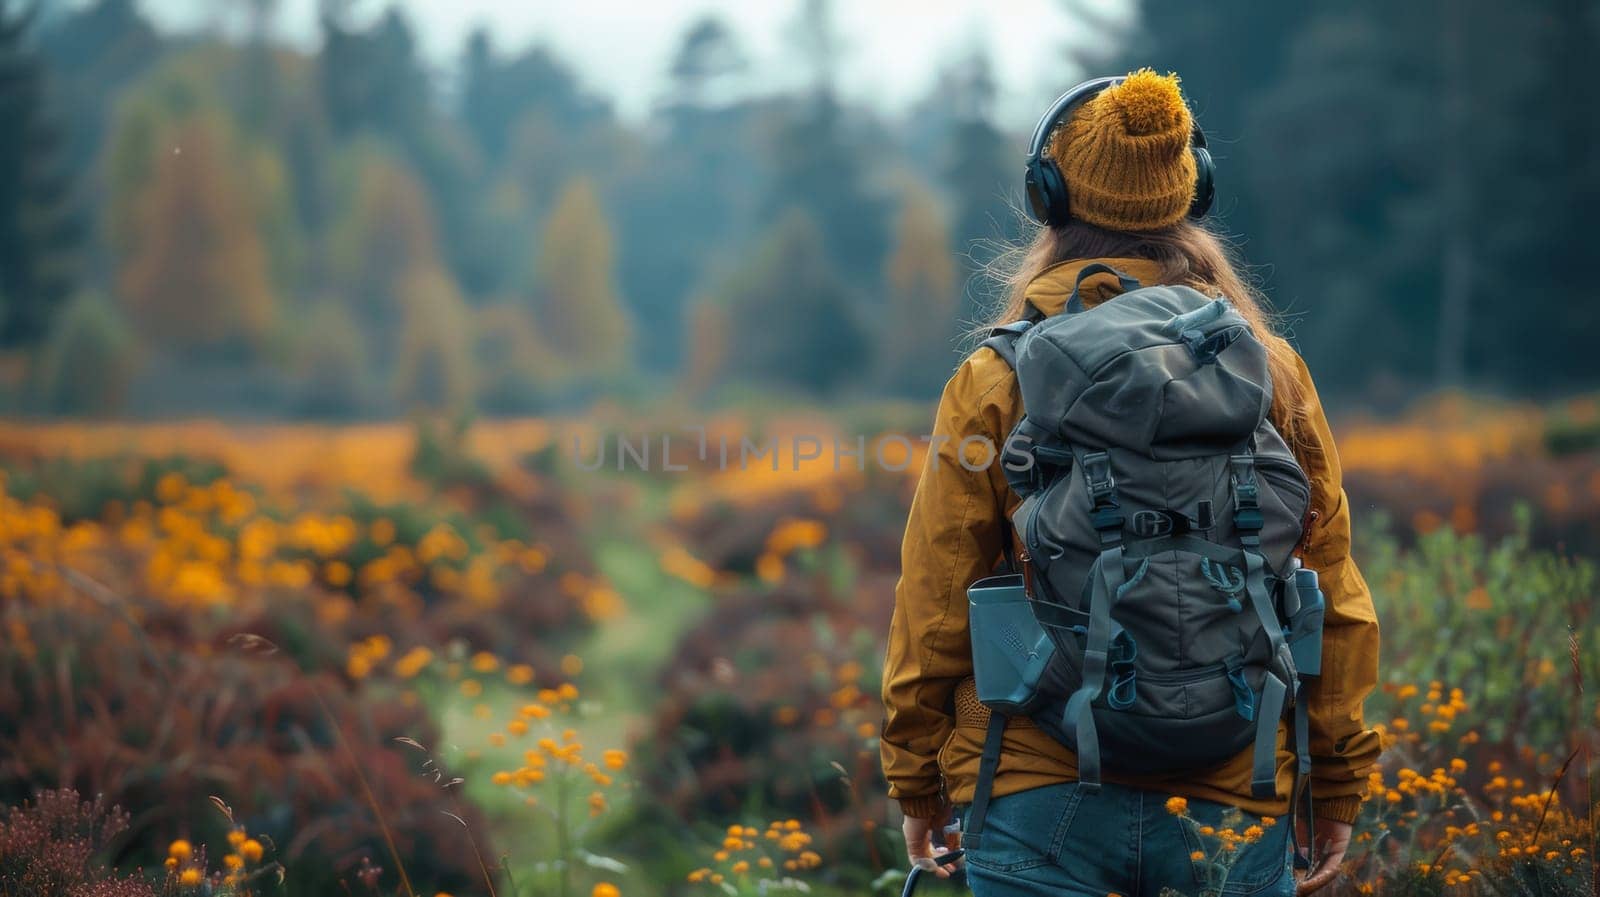 Rear view of a young woman hiker with a backpack looking at nature in a forest in autumn by papatonic